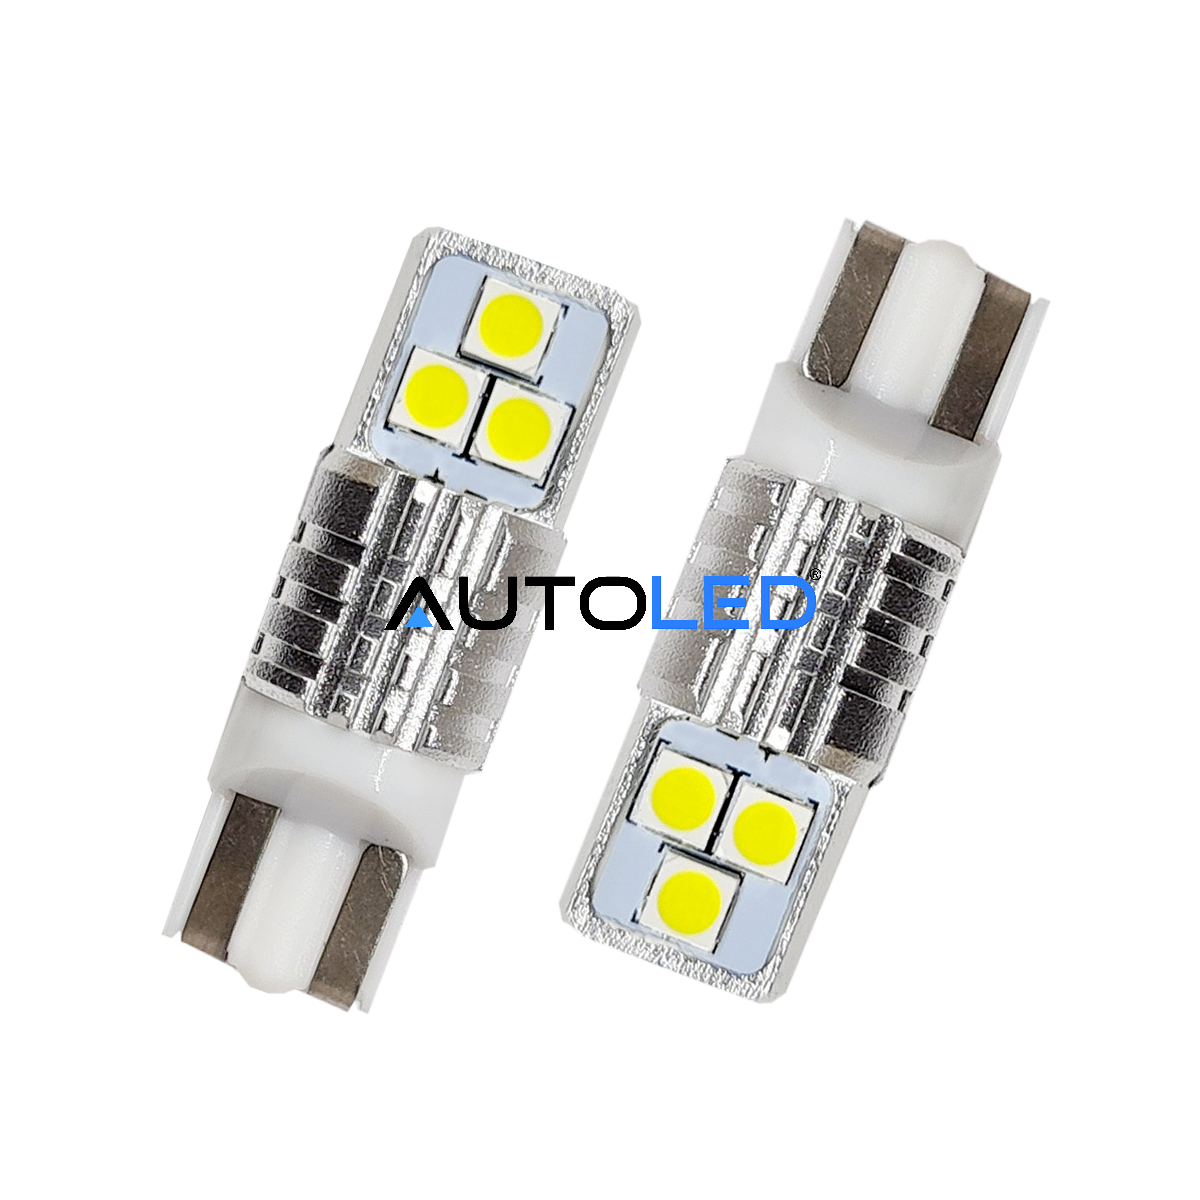 2 AMPOULE W5W CANBUS 15 LED SMD SANS ERREUR ODB - ADTUNING FRANCE